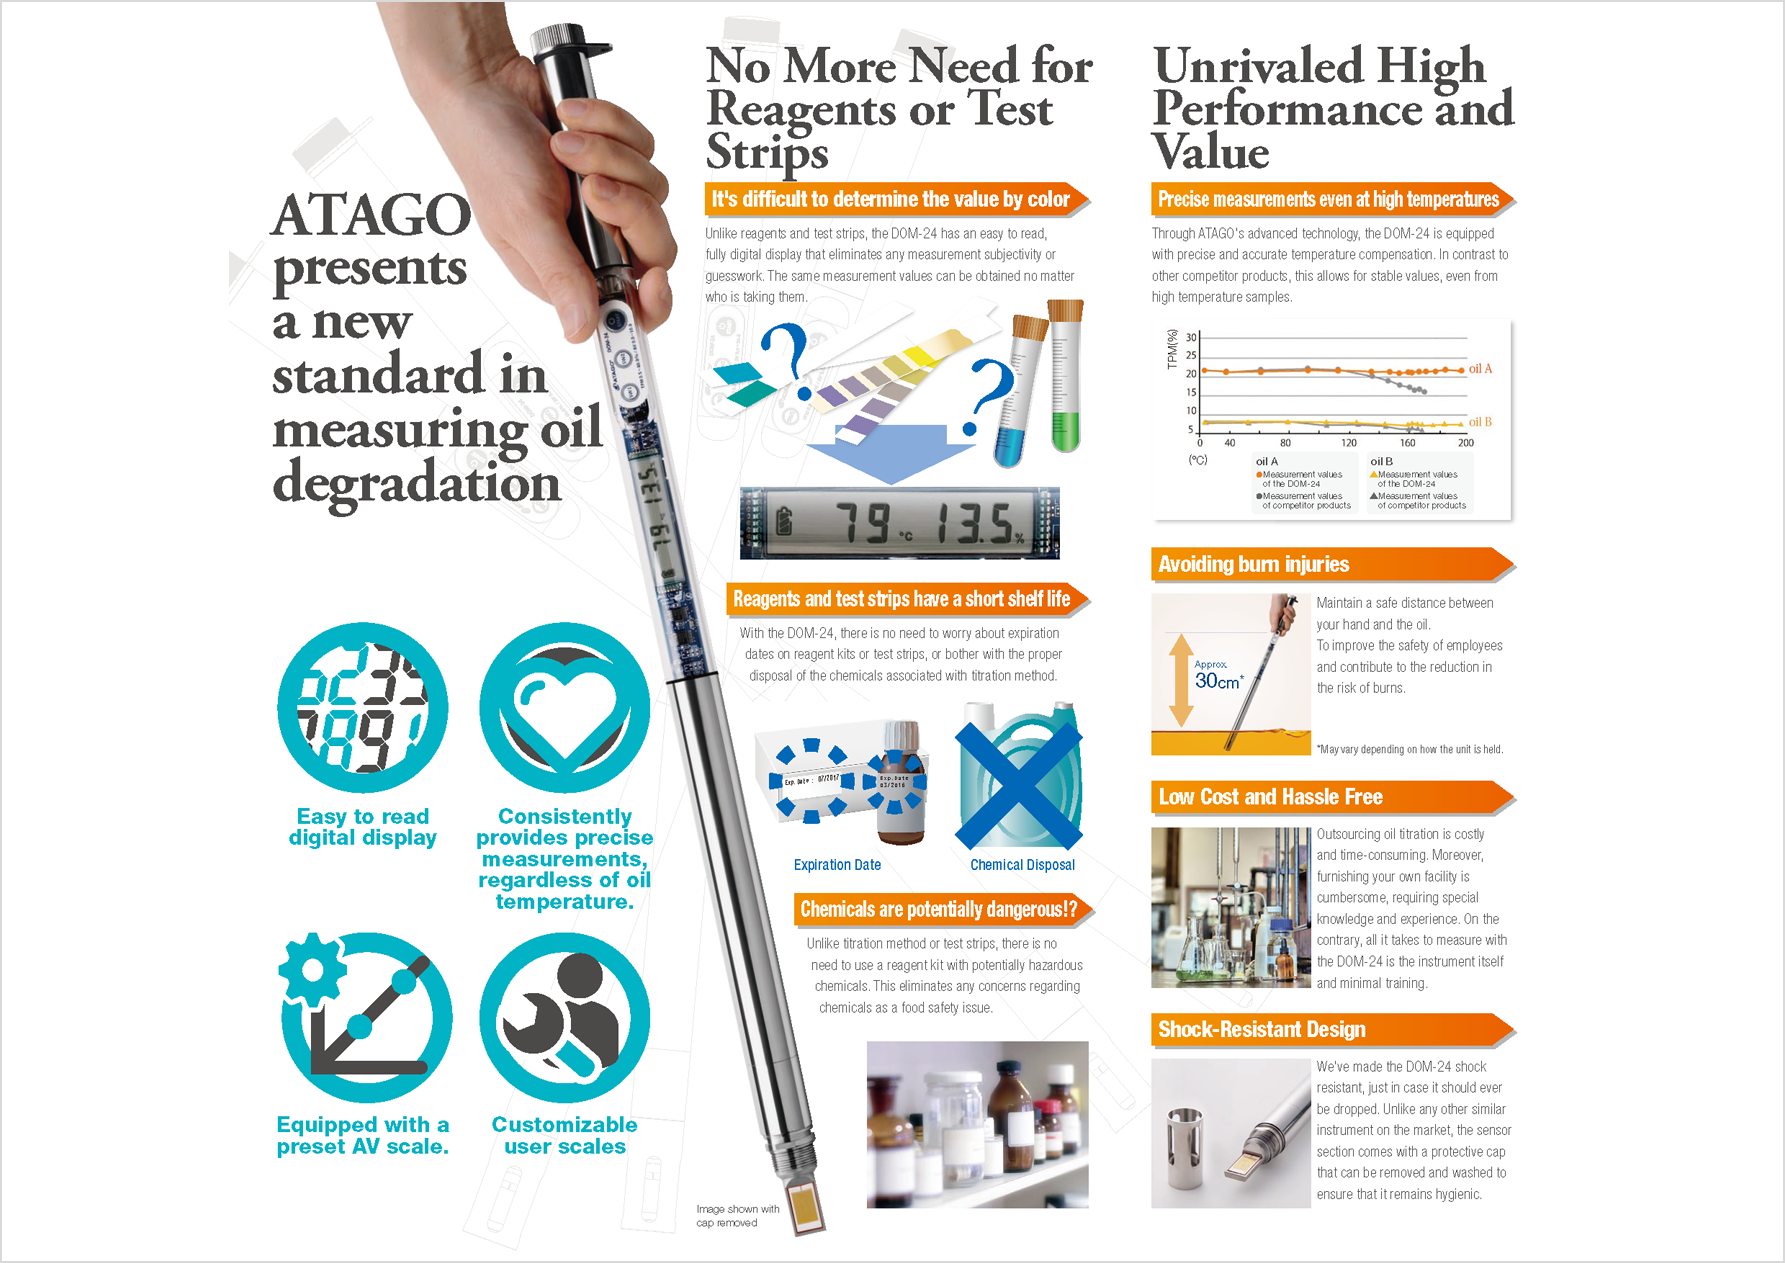 ATAGO presents a new standard in measuring oil degradation / No More Need for Reagents or Test Strips / Unrivaled High Performance and Value